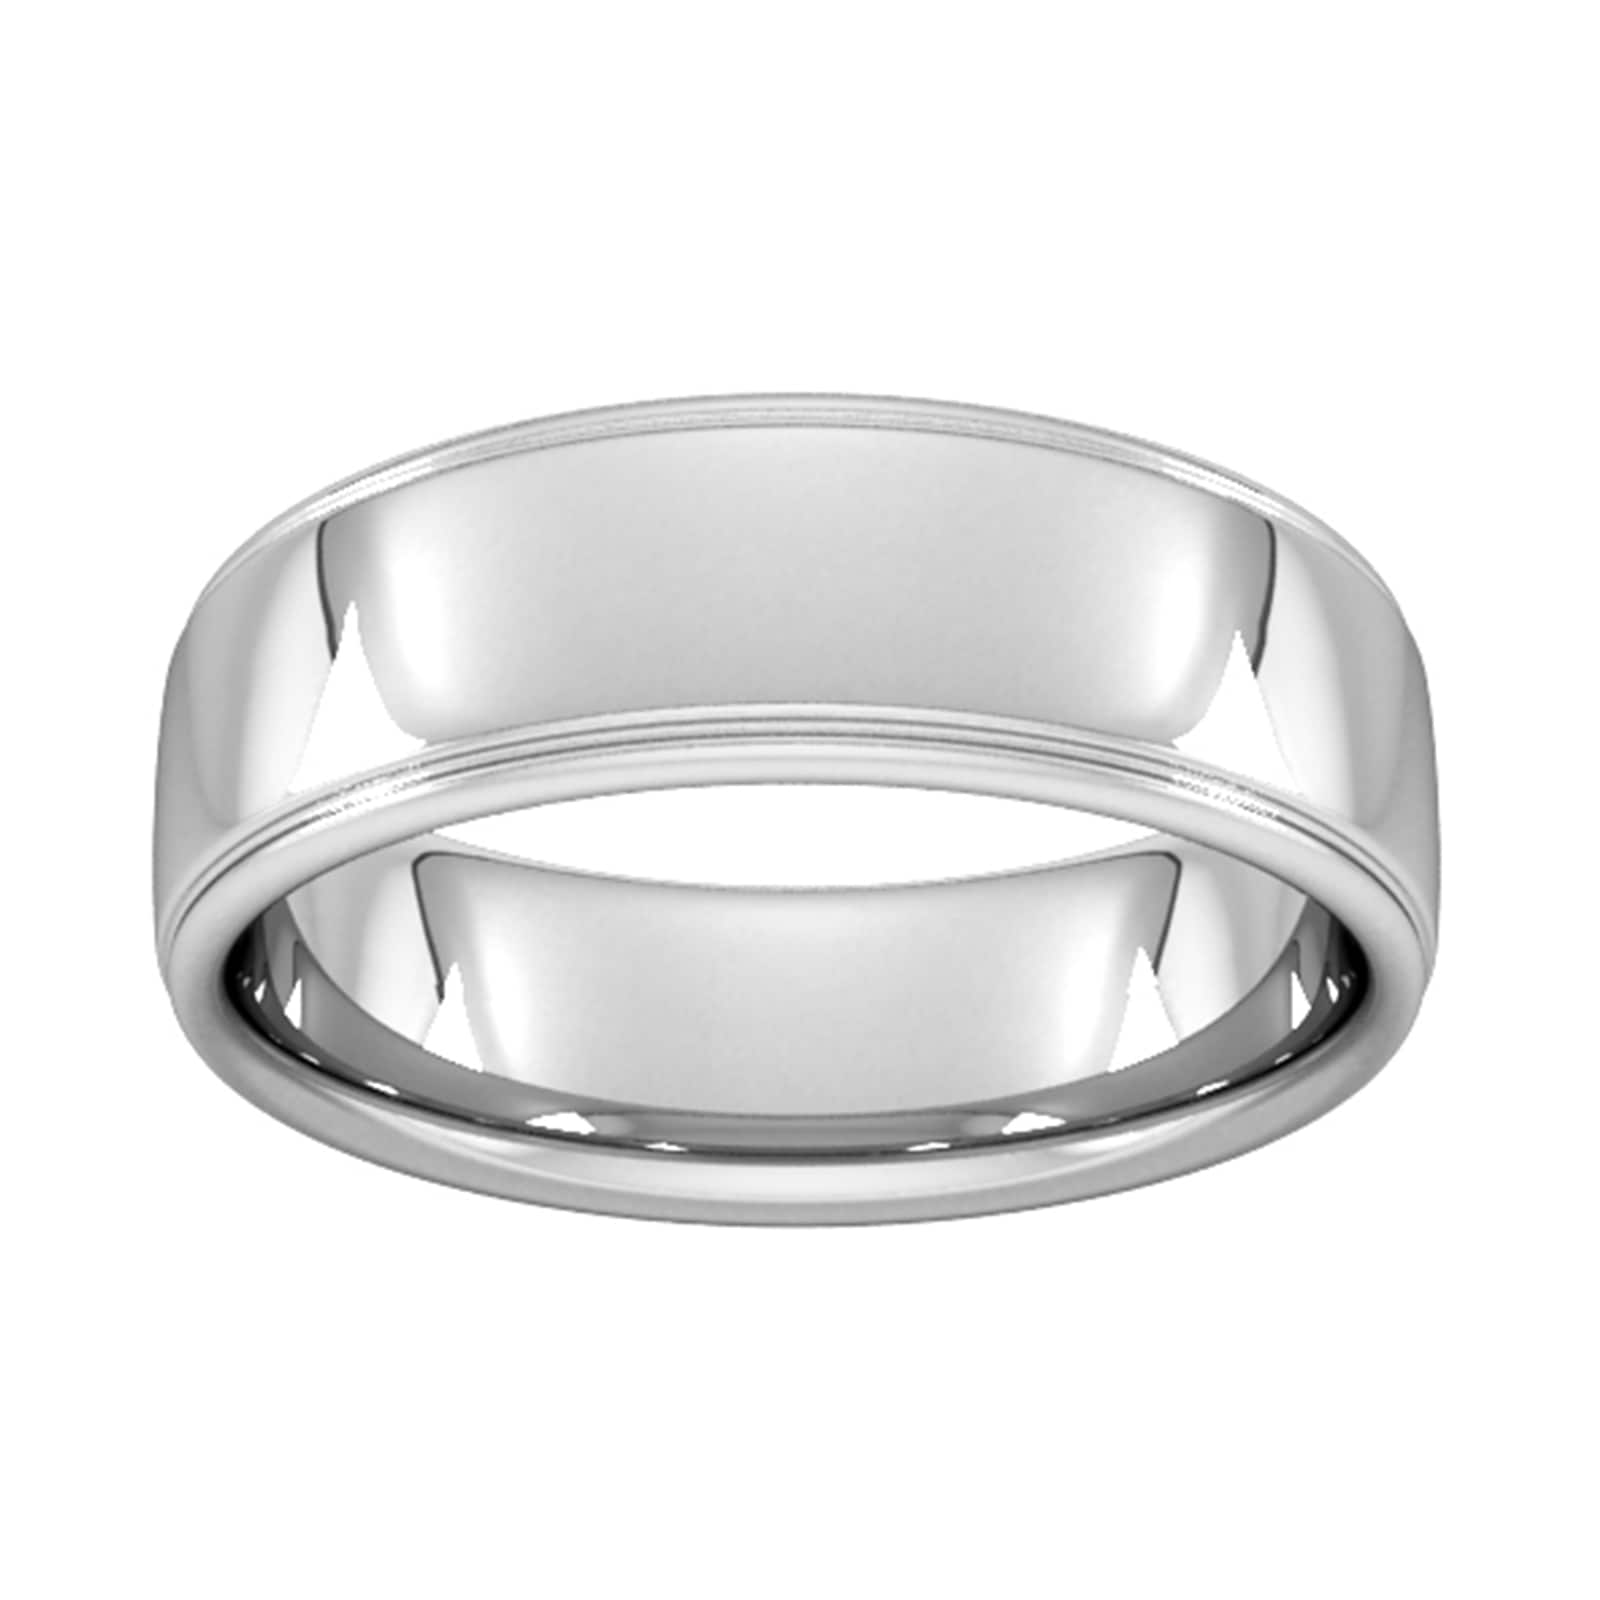 7mm Slight Court Heavy Polished Finish With Grooves Wedding Ring In 18 Carat White Gold - Ring Size O